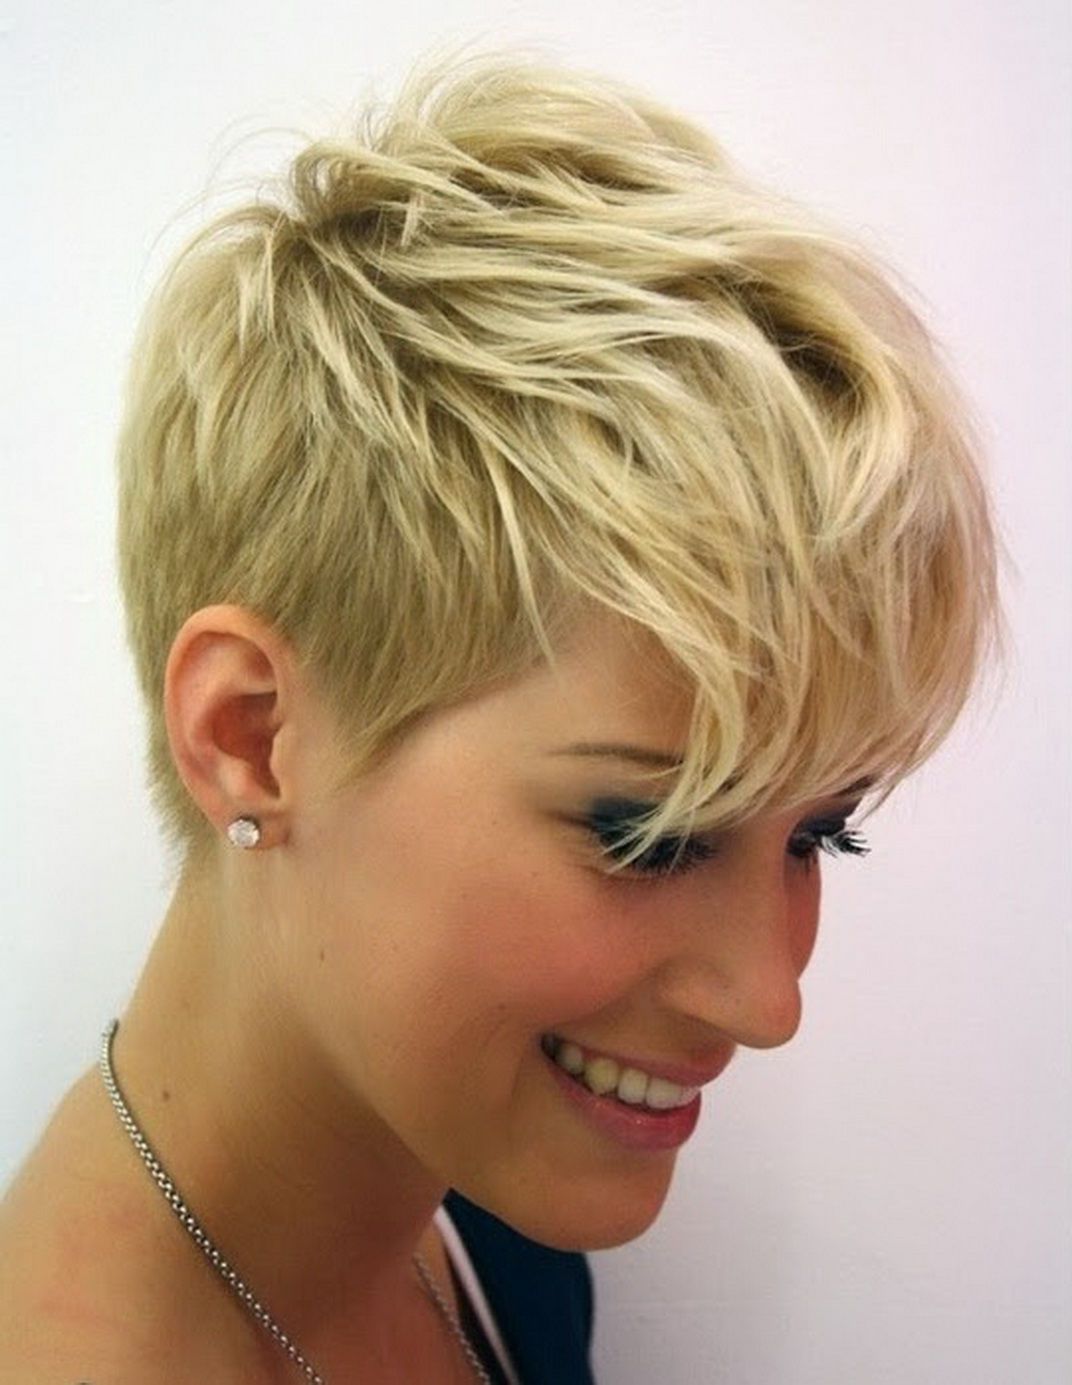 25 Short Hairstyles For Heart Shaped Faces | Hair & Makeup With Regard To Short Hairstyles For Heart Shaped Faces (Photo 1 of 25)